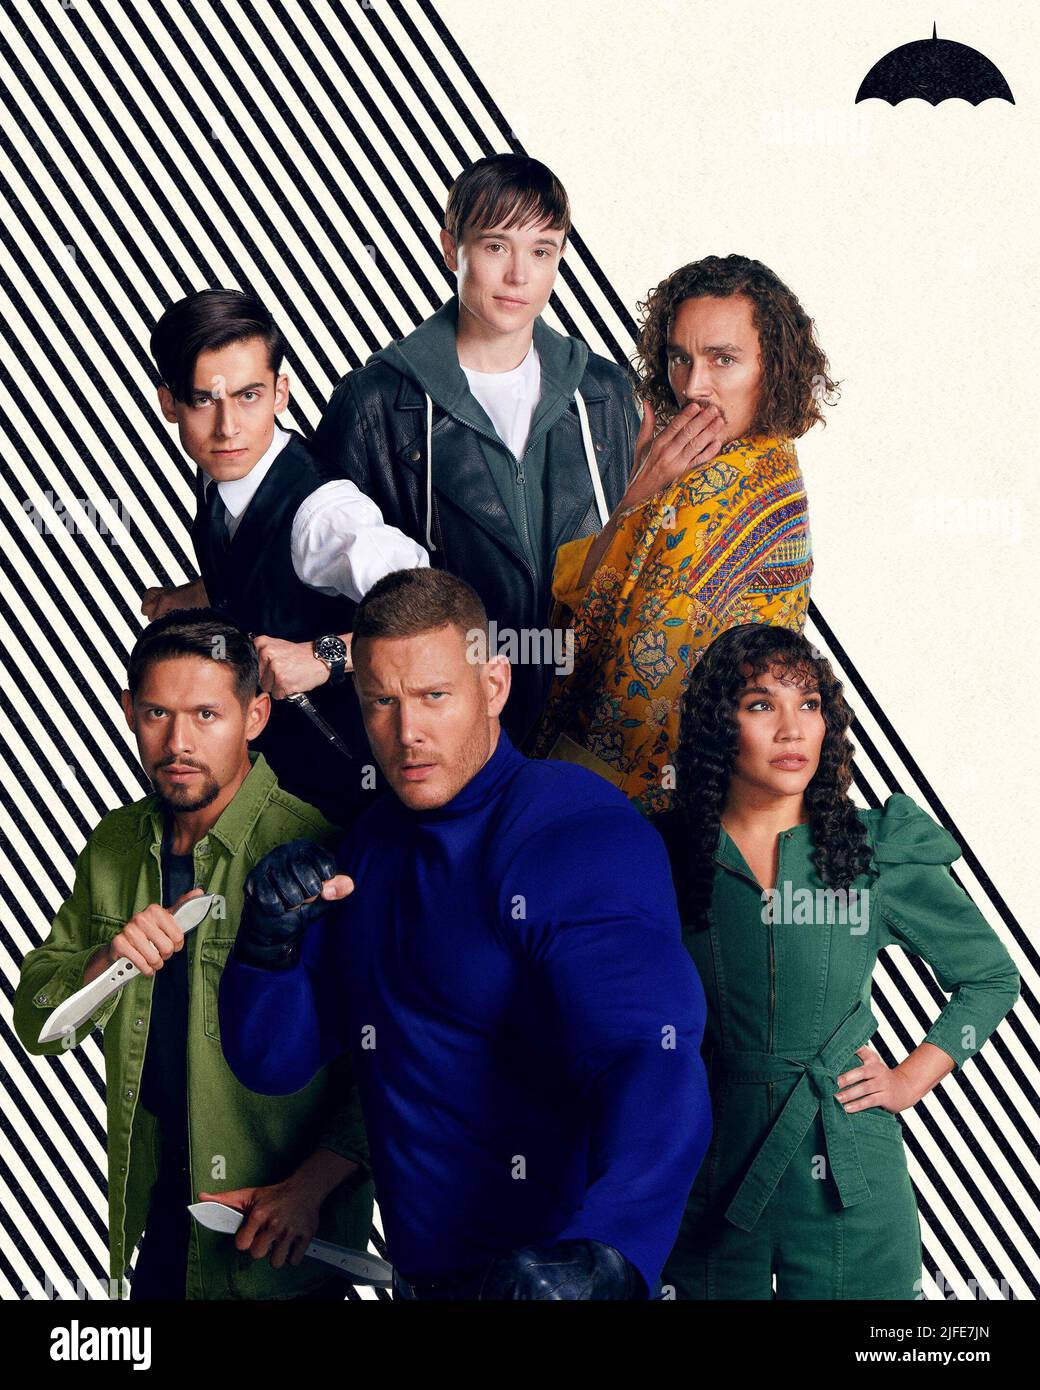 ELLIOT PAGE, ROBERT SHEEHAN, TOM HOPPER, AIDAN GALLAGHER, DAVID CASTAÑEDA and EMMY RAVER-LAMPMAN in THE UMBRELLA ACADEMY (2019), directed by JEREMY SLATER. Credit: NETFLIX / Album Stock Photo